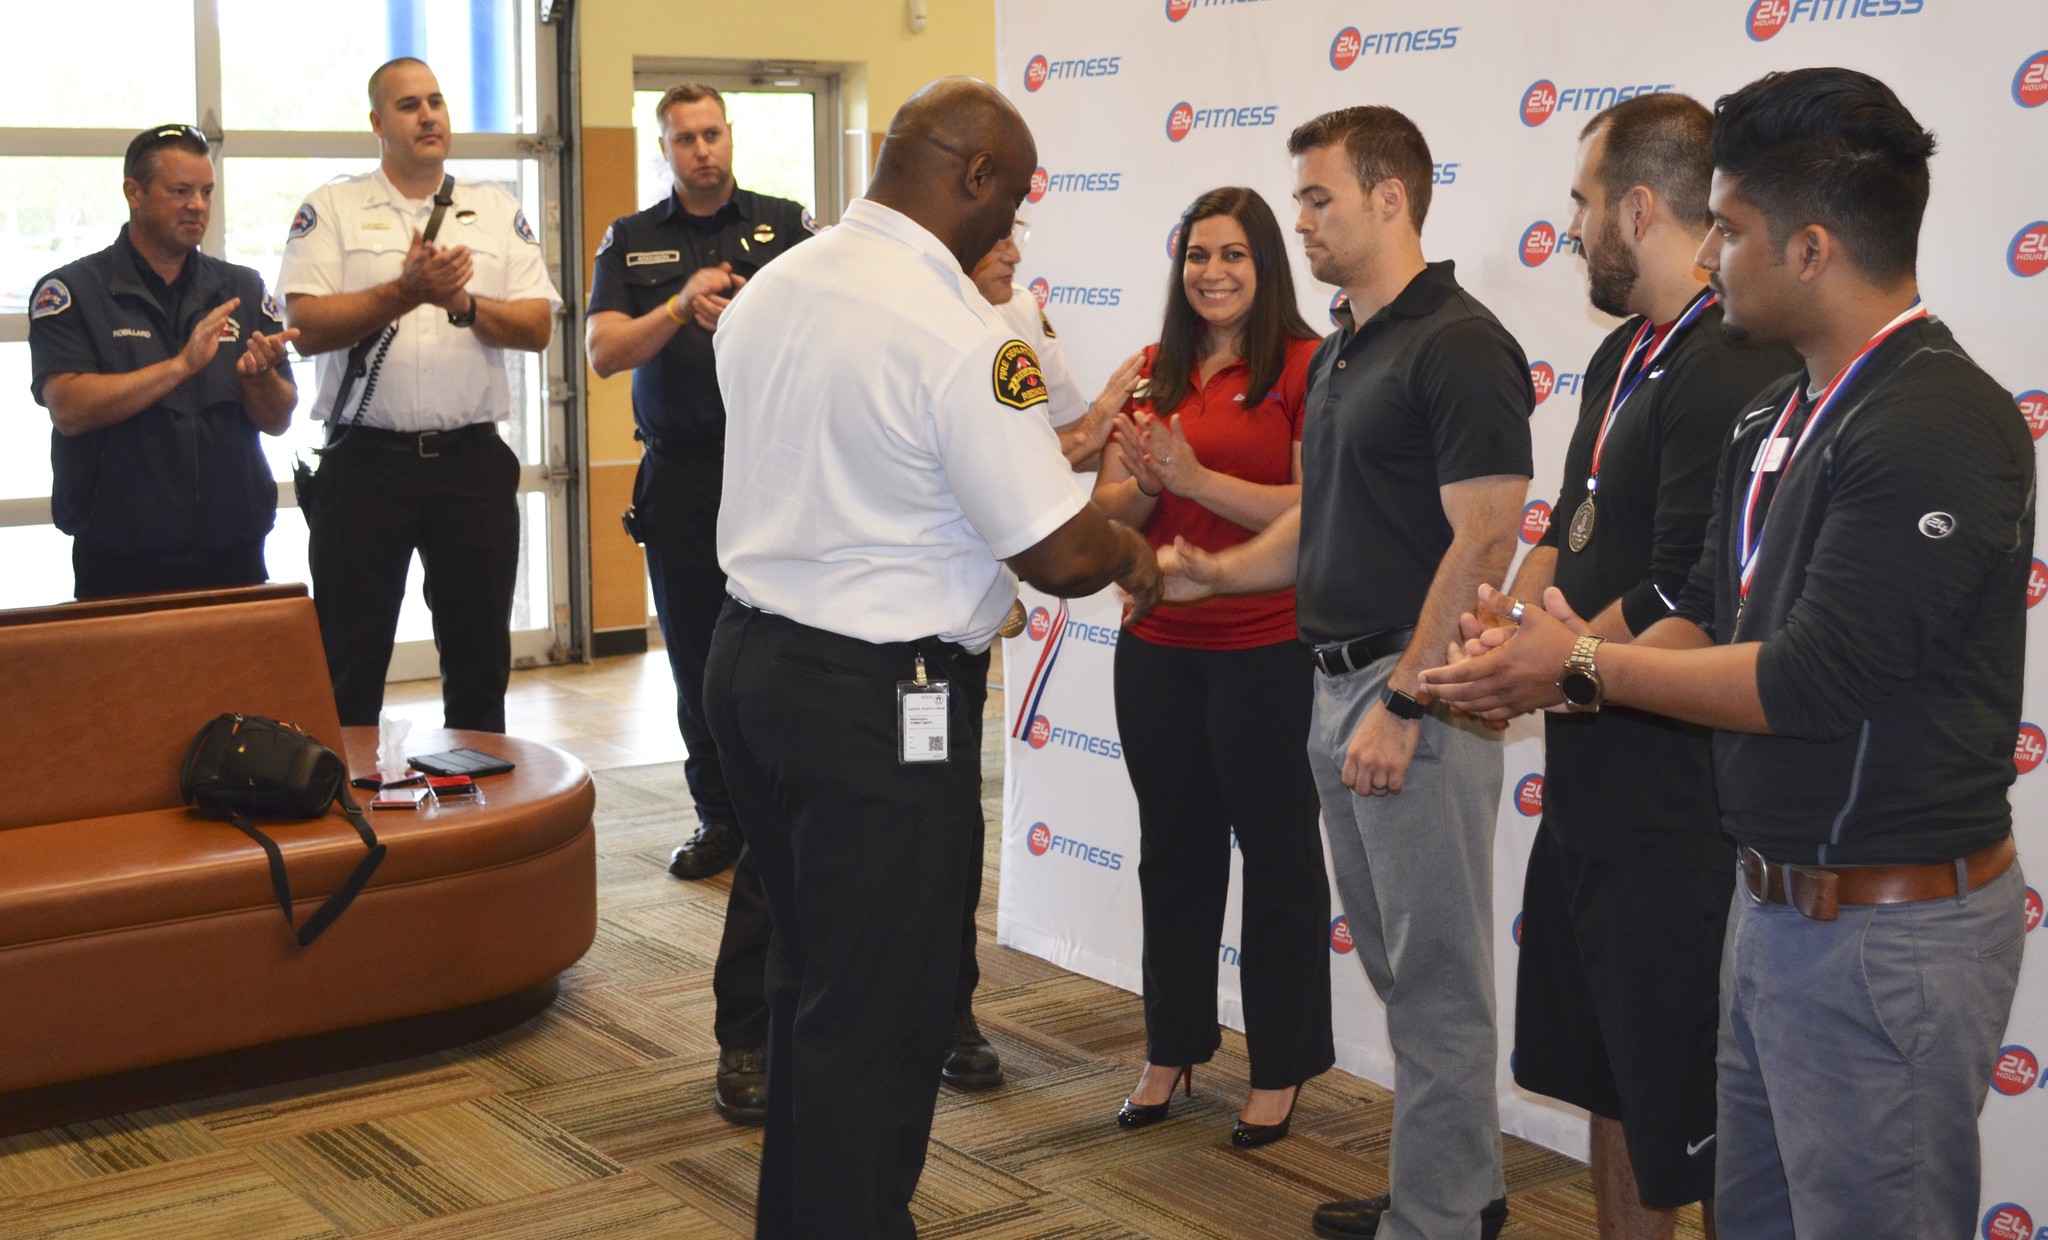 Redmond Fire Department chief Tommy Smith honors 24 Hour Fitness’s Laurel Moffitt